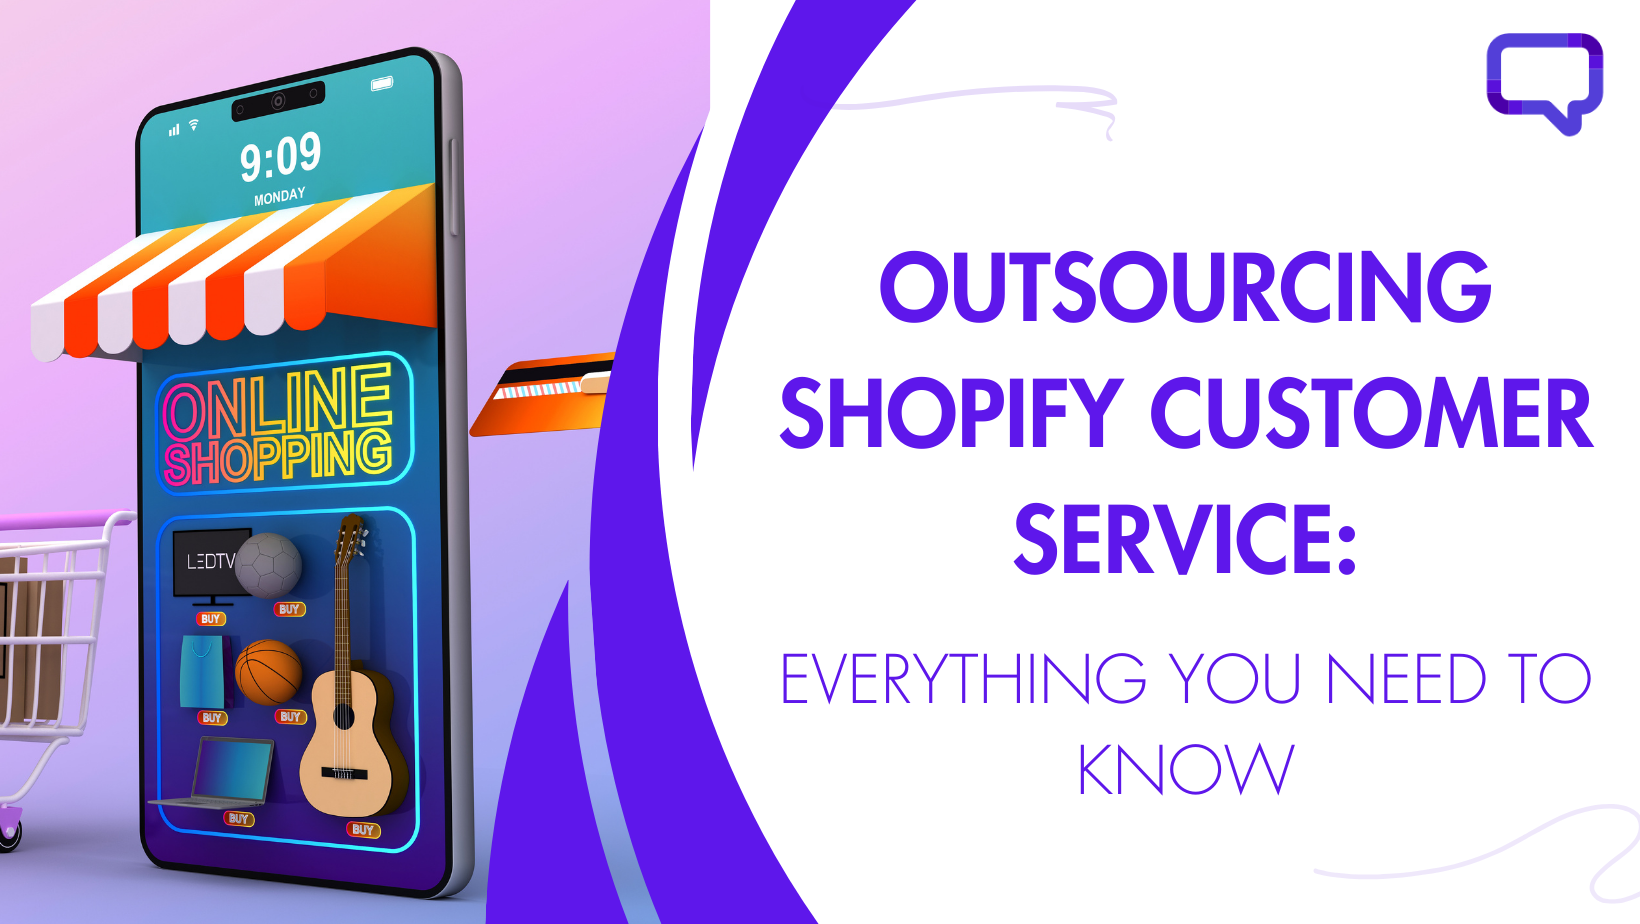 Outsourcing Shopify Customer Service